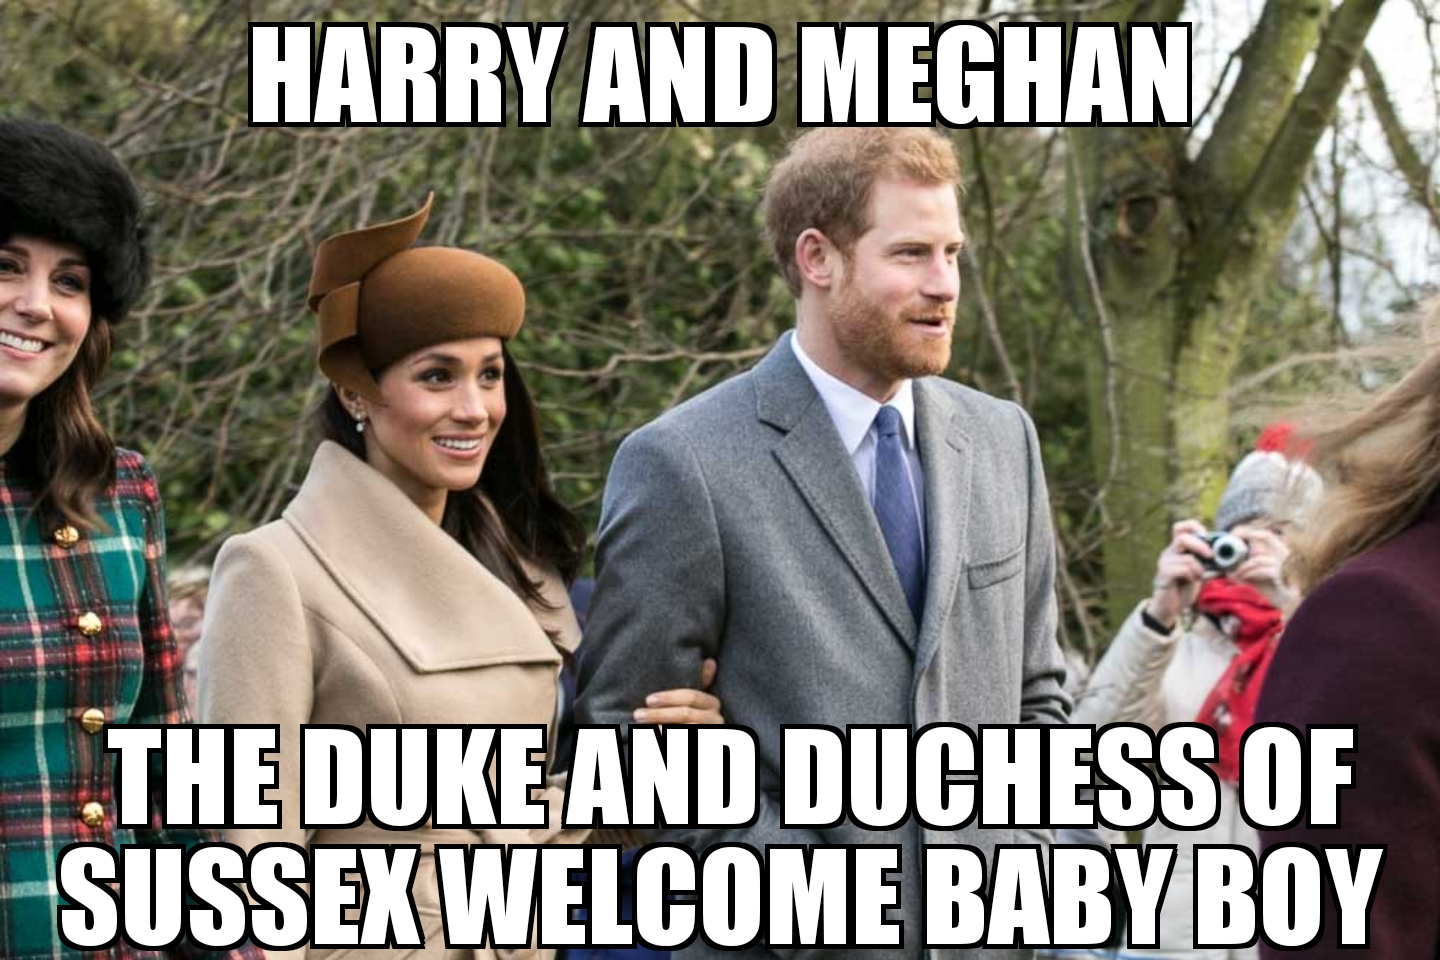 Harry and Meghan welcome baby boy